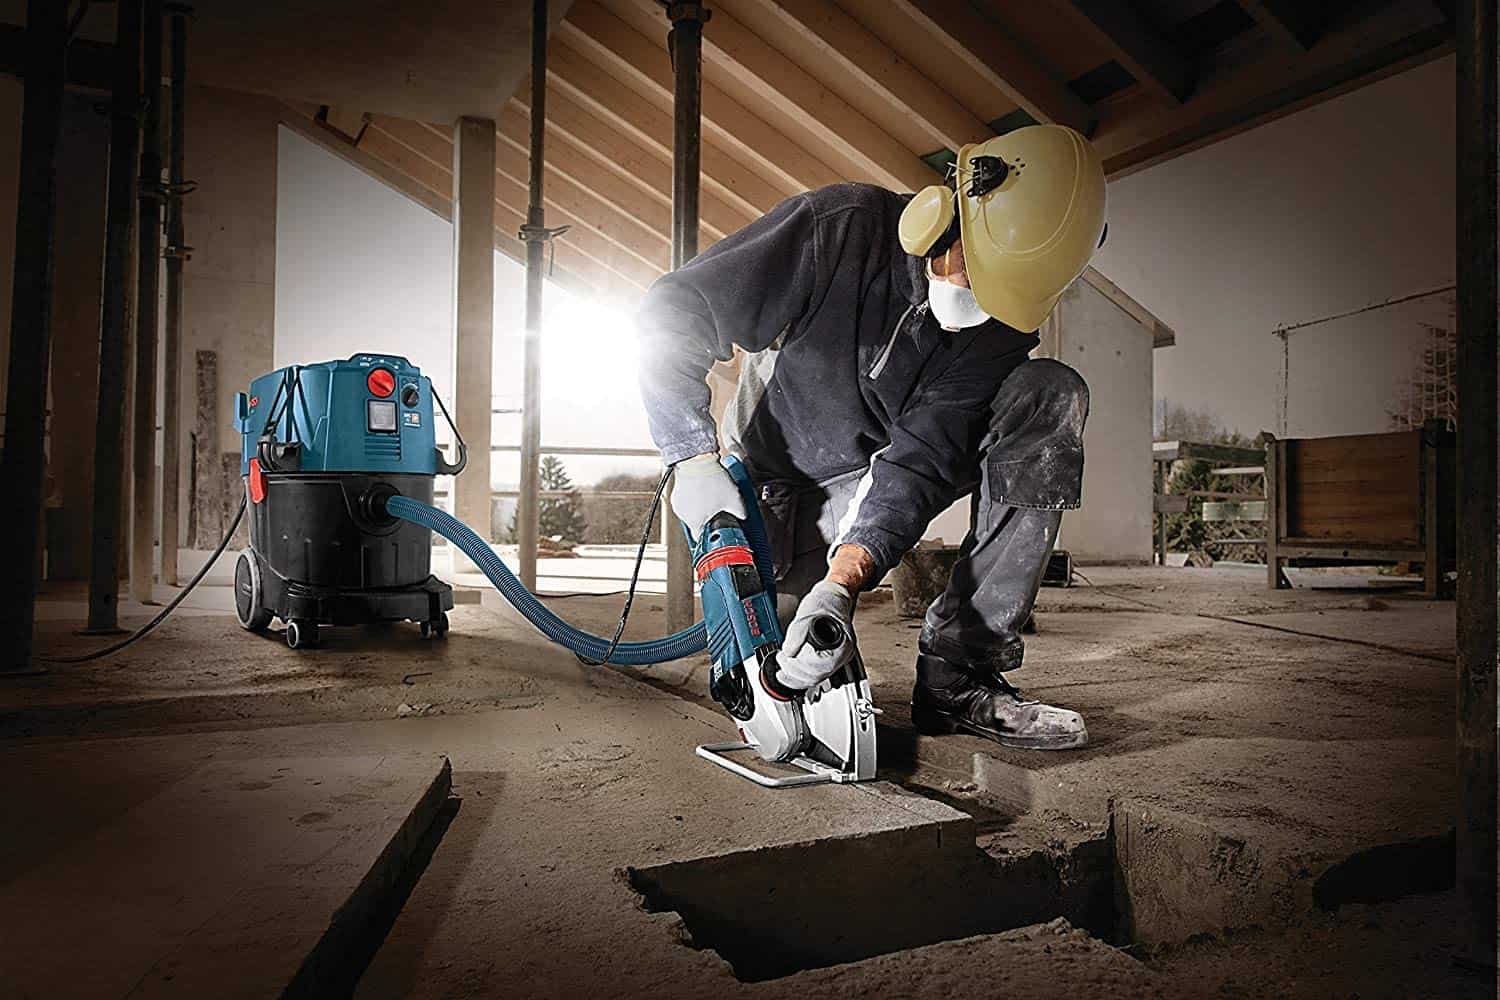 Best dust extractor for power tools: Bosch VAC090AH